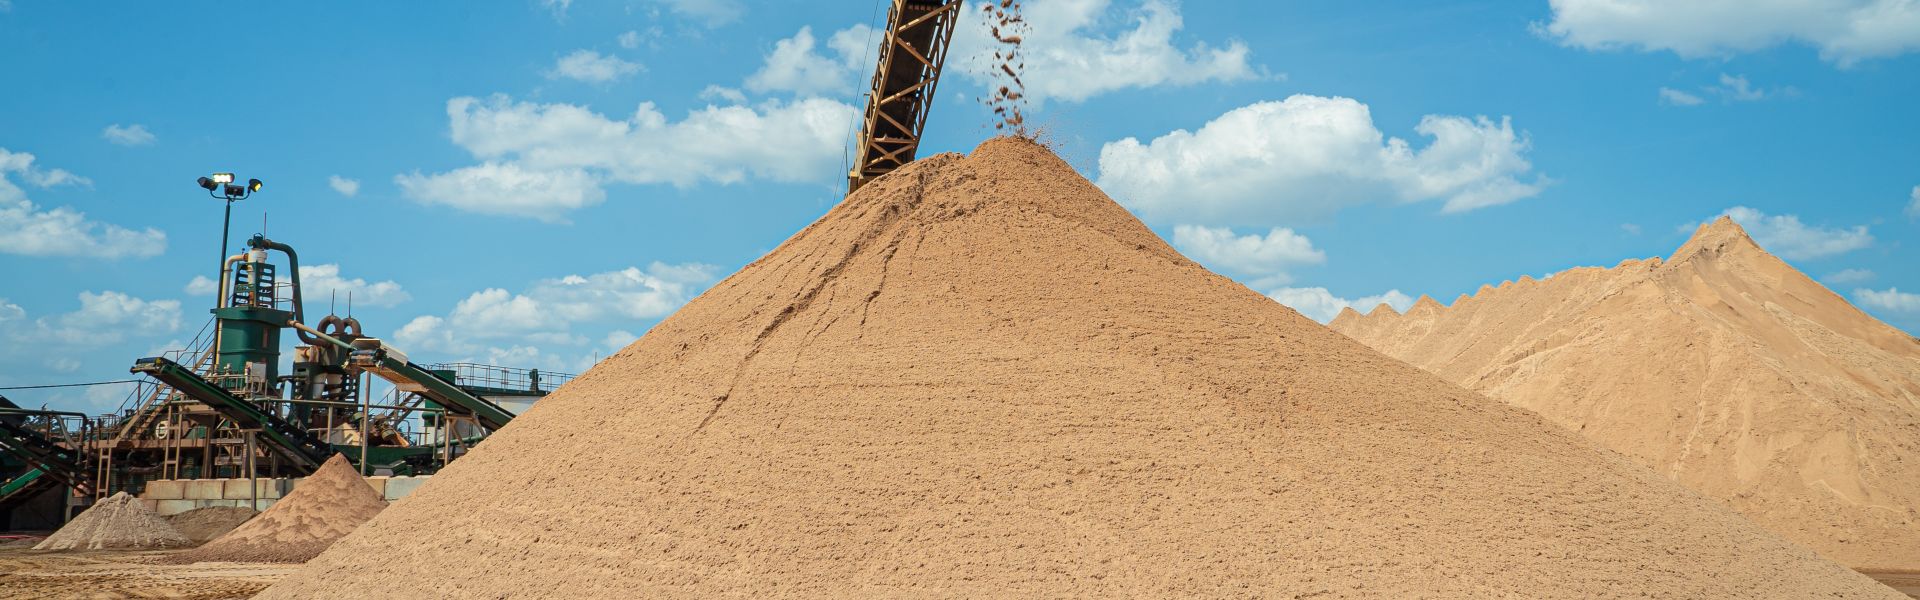 Resolve Aggregates Golf & Sports Sand Wash Plant in Texas | CDE